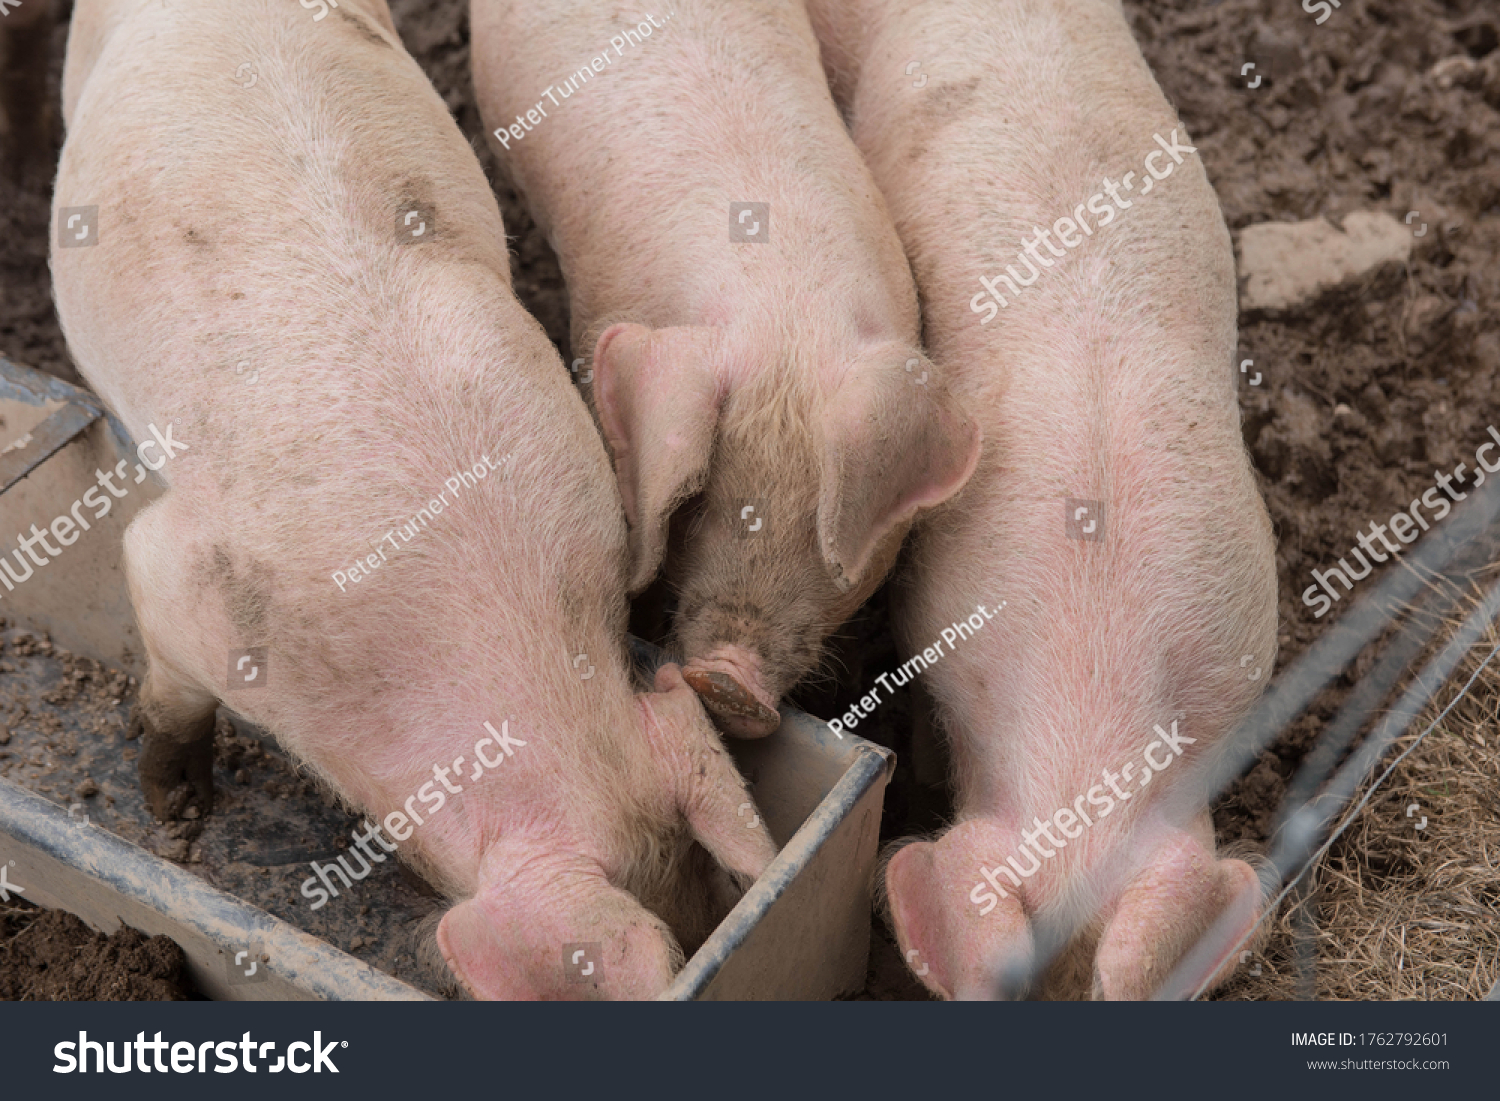 Domestic Pigs (Sus scrofa domesticus) Wallowing in Mud on a Farm in Rural Devon, England, UK #1762792601